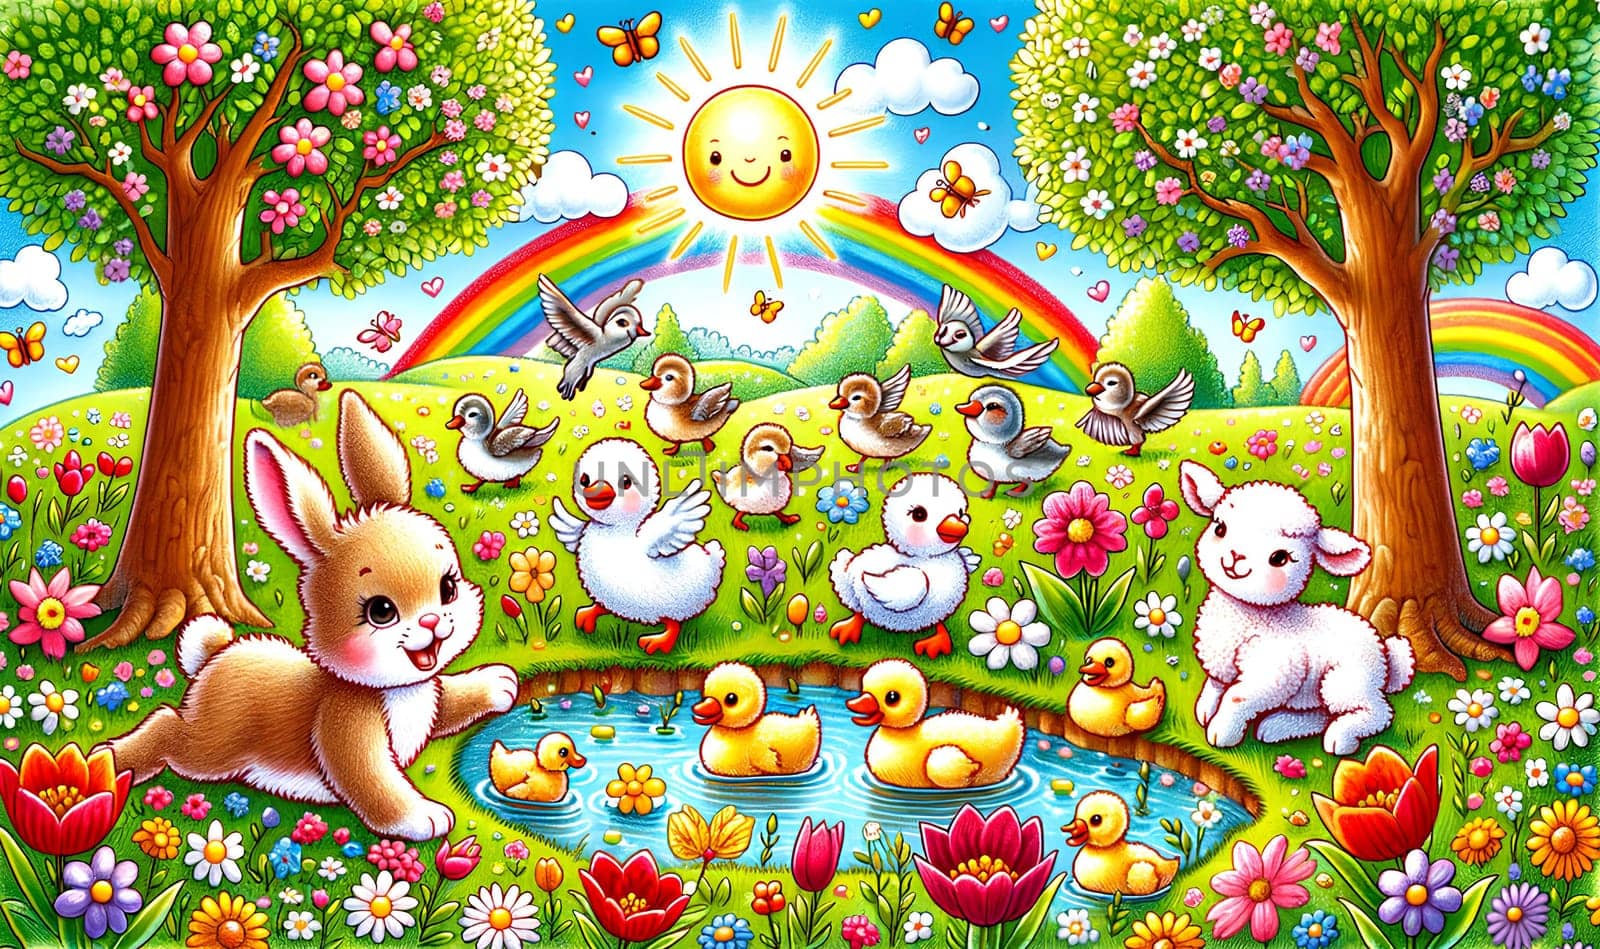 children's spring drawing. Ducklings are swimming in the pond, a lamb and other birds are grazing in the meadow, trees are blooming, butterflies are flying, the sun is shining.